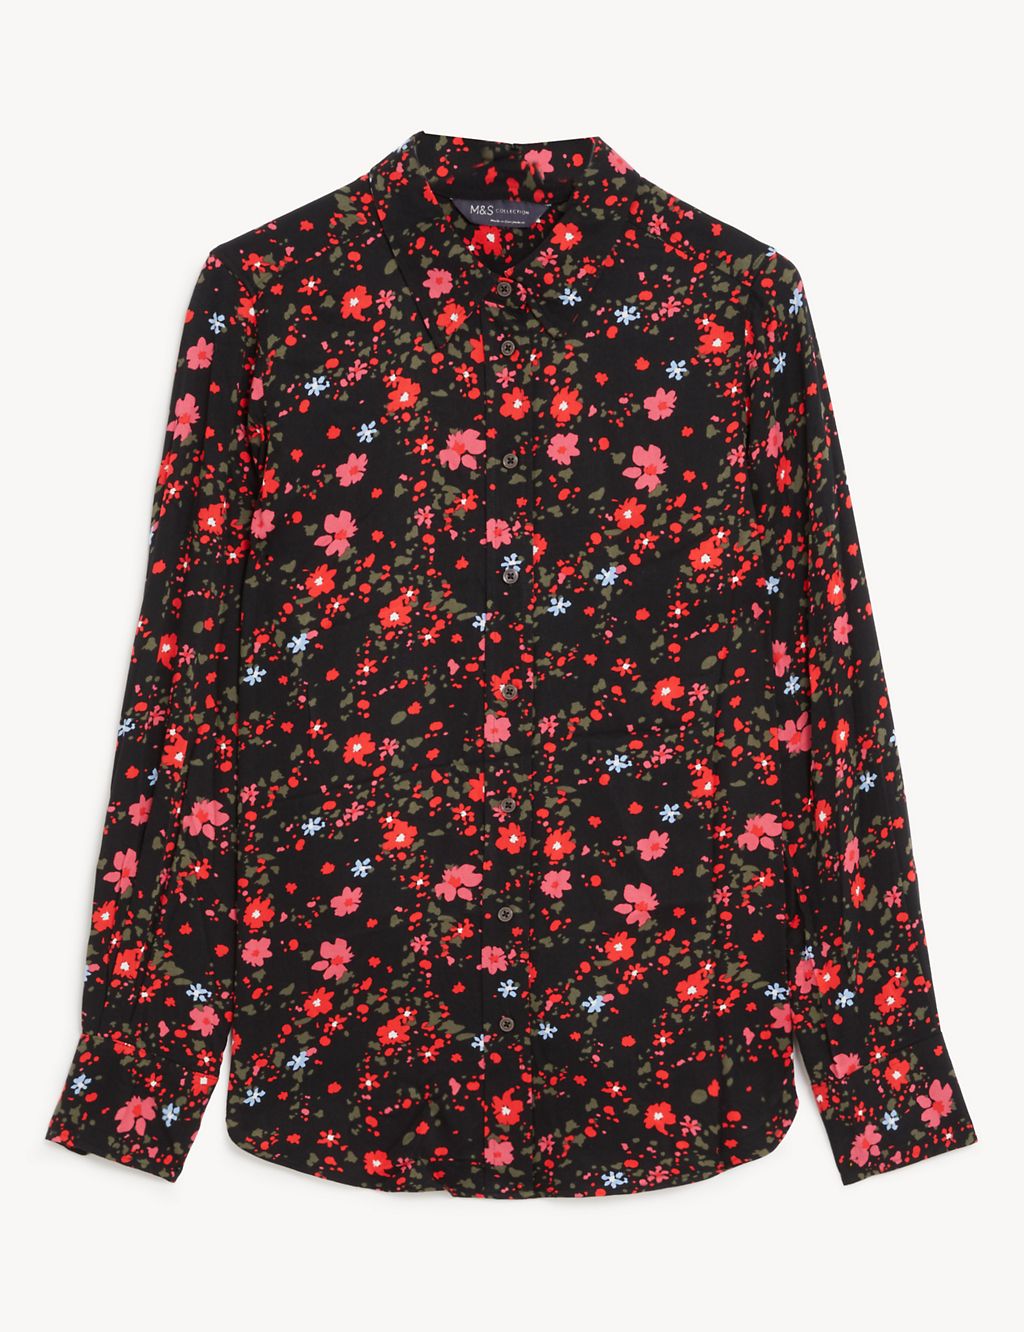 Printed Collared Long Sleeve Shirt | M&S Collection | M&S